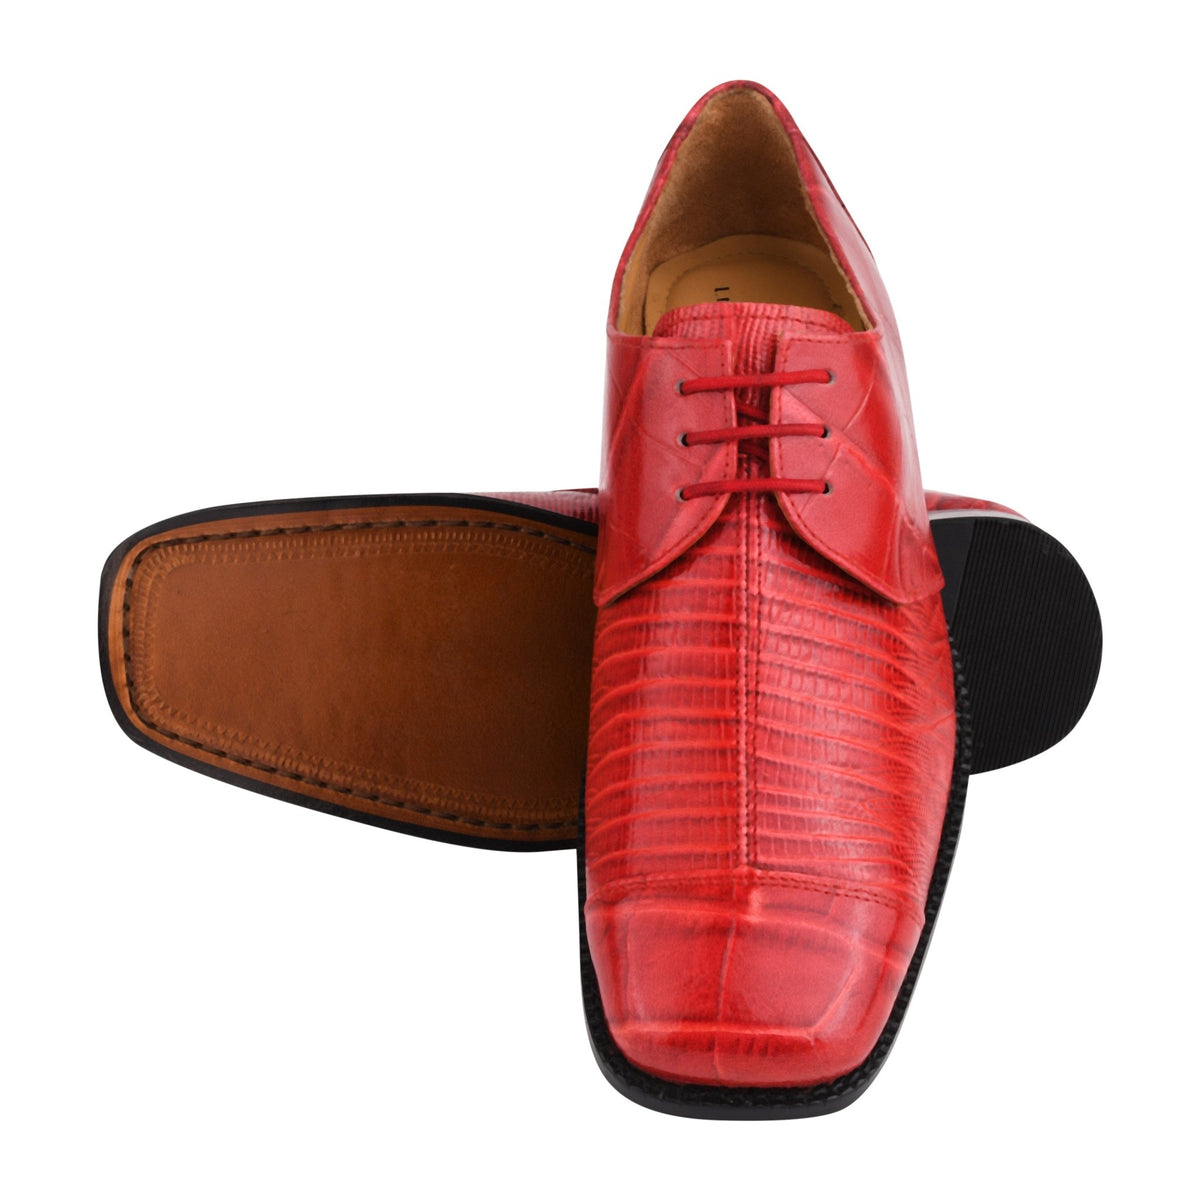 Handmade men's lace-up loafers in powder pink leather